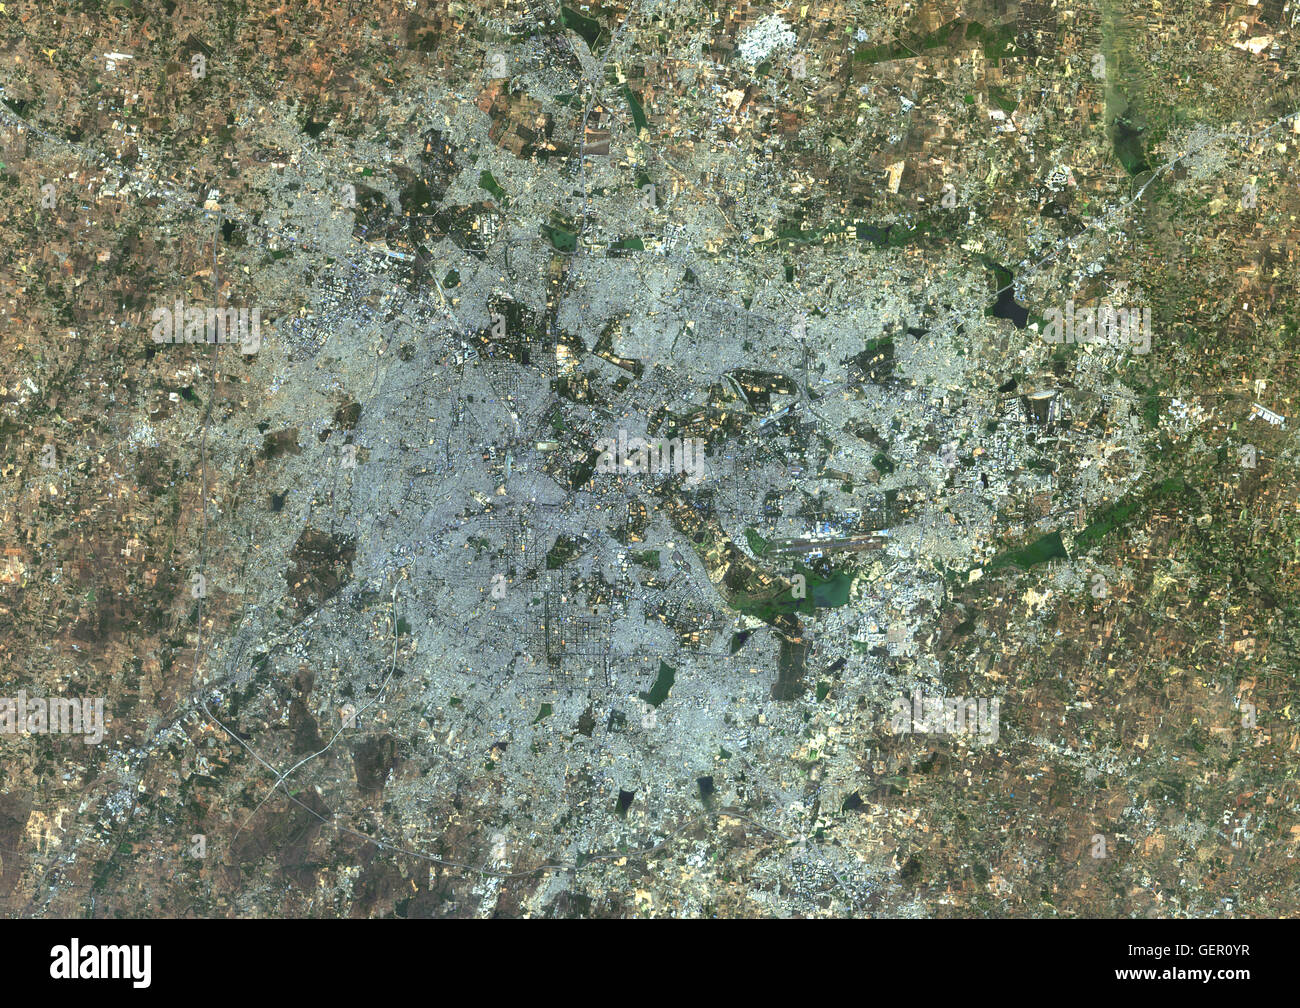 Satellite view of Bangalore, India. It is the capital of the Indian state of Karnataka. This image was compiled from data acquired in 2014 by Landsat 8 satellite. Stock Photo